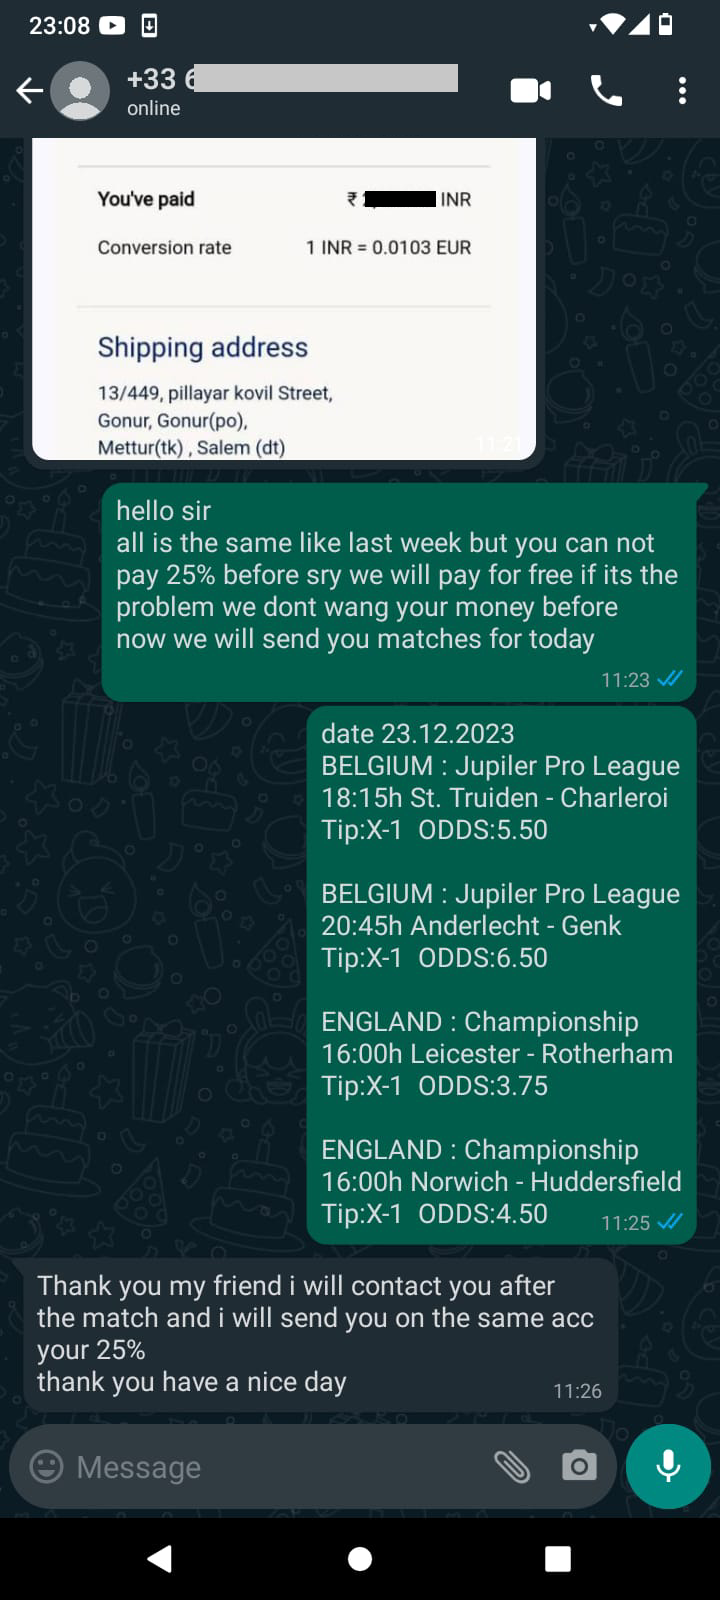 Professional Europe Tips and Soccer Bet 365 Fixed Matches info 1X2